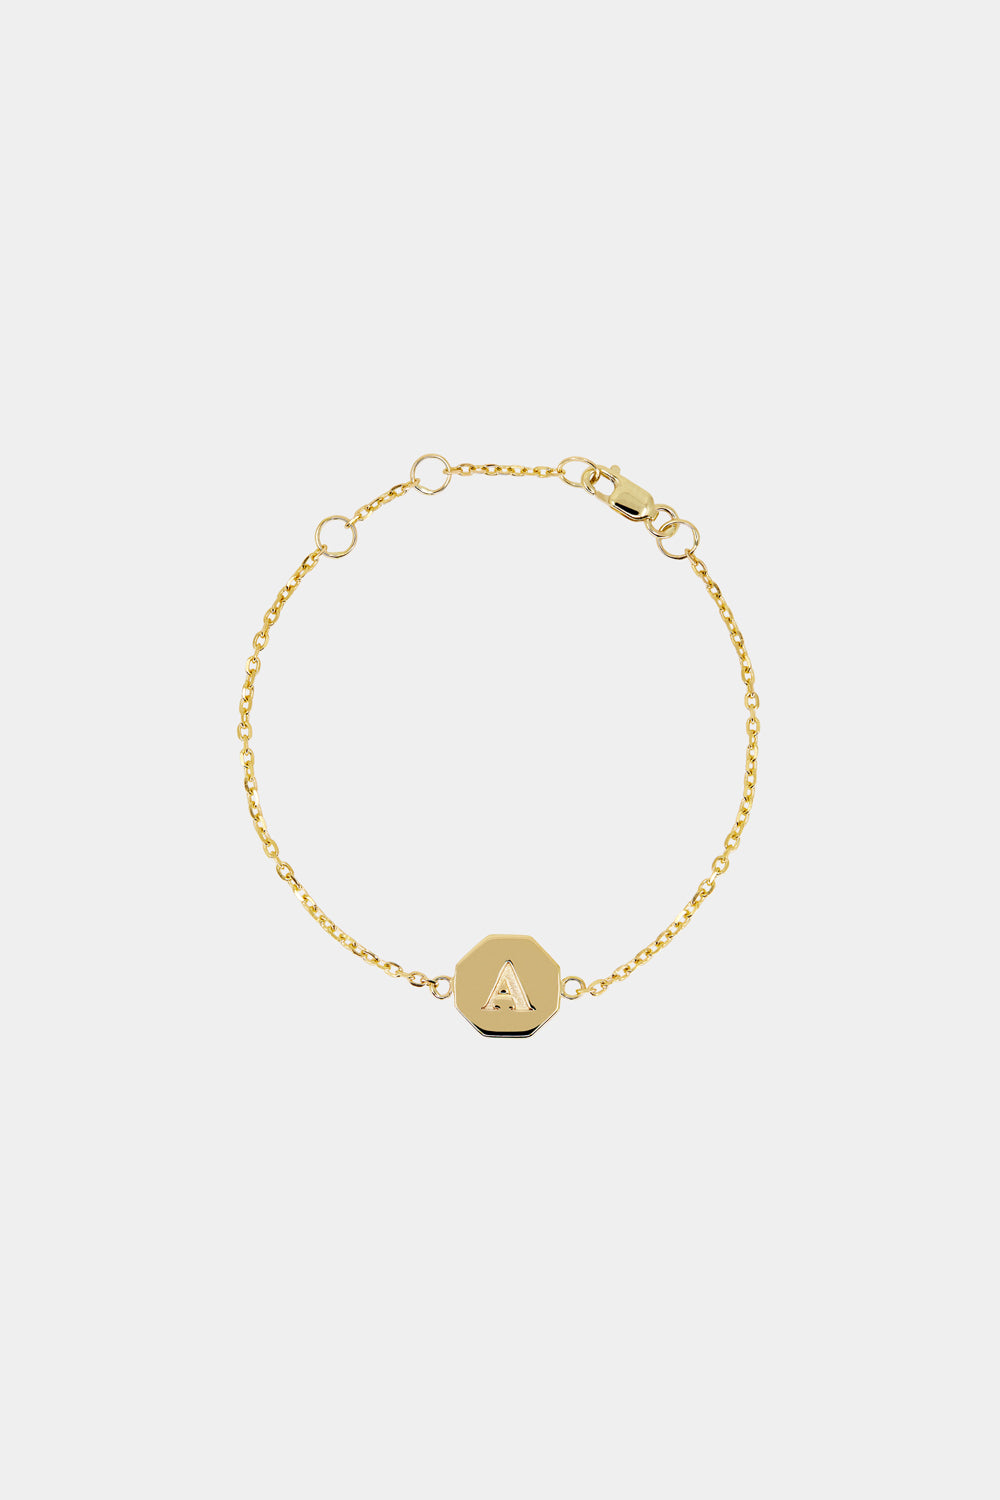 Amazon.com: CEEAL Dainty Initial Bracelet For Women Girls,18k gold plated  Paperclip Chain Bracelet Simple Cubic Zircon Letter Initial women Bracelets  Jewelry Gift : Clothing, Shoes & Jewelry